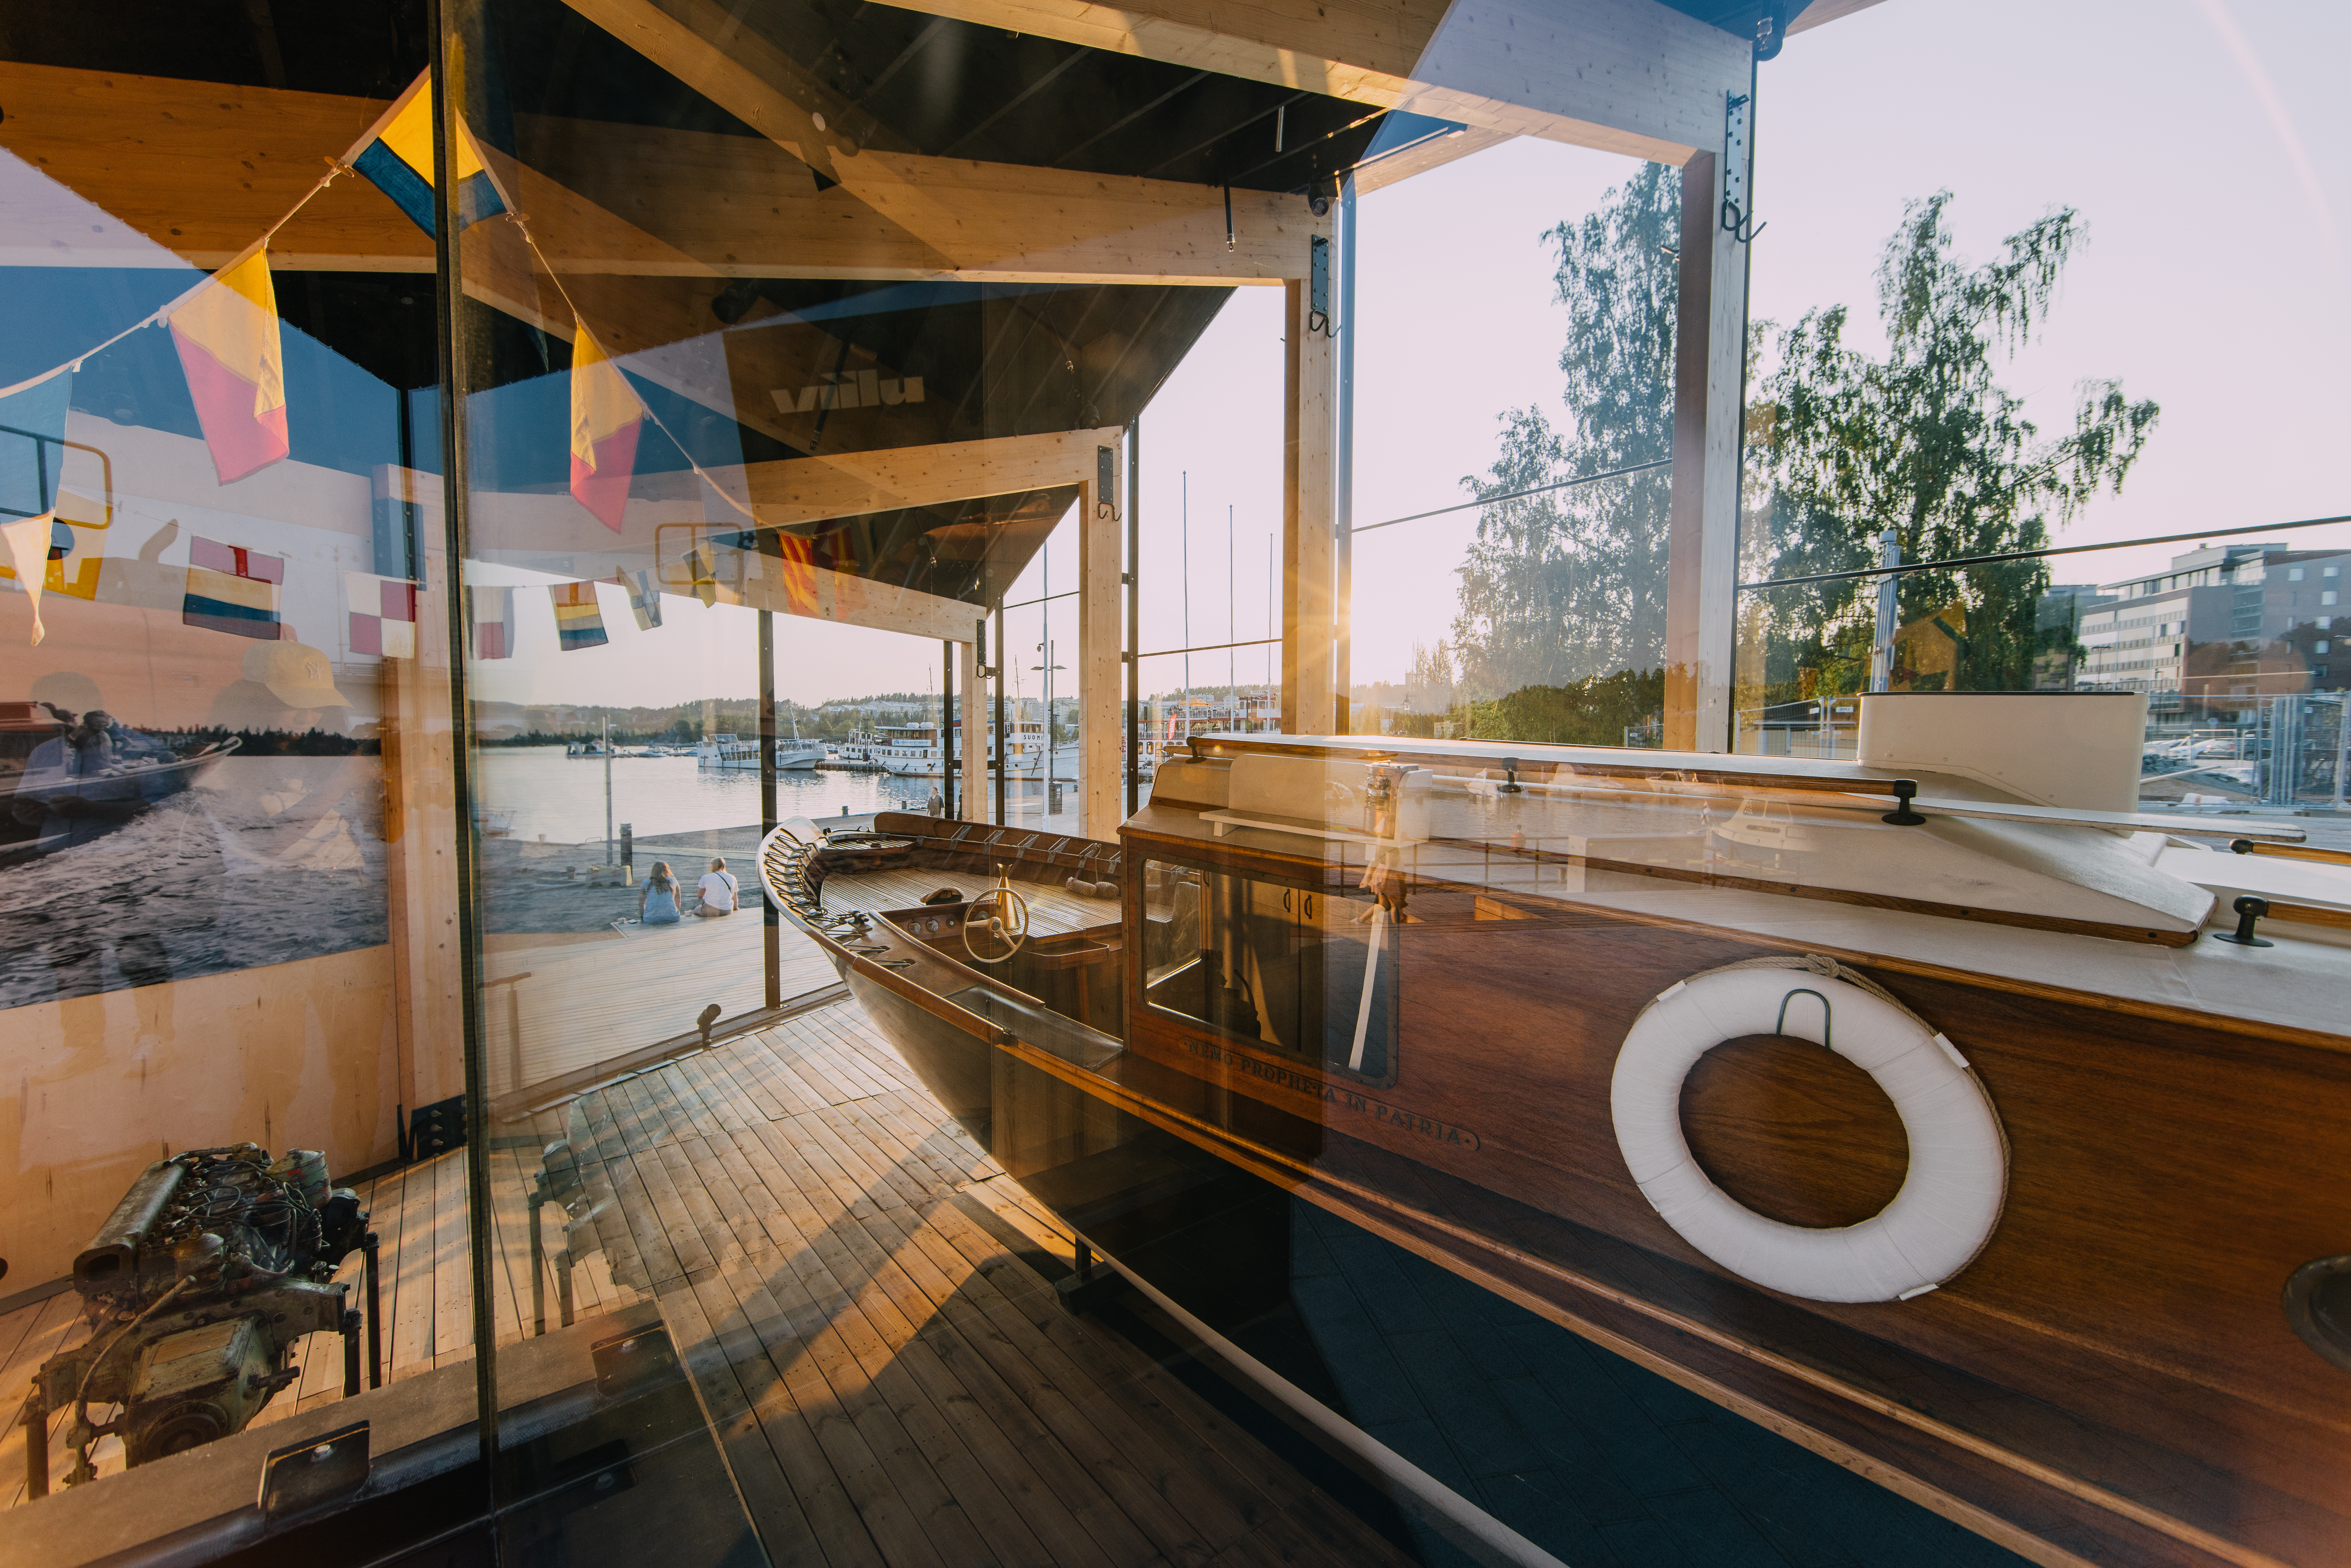 A boat designed by Alvar Aalto